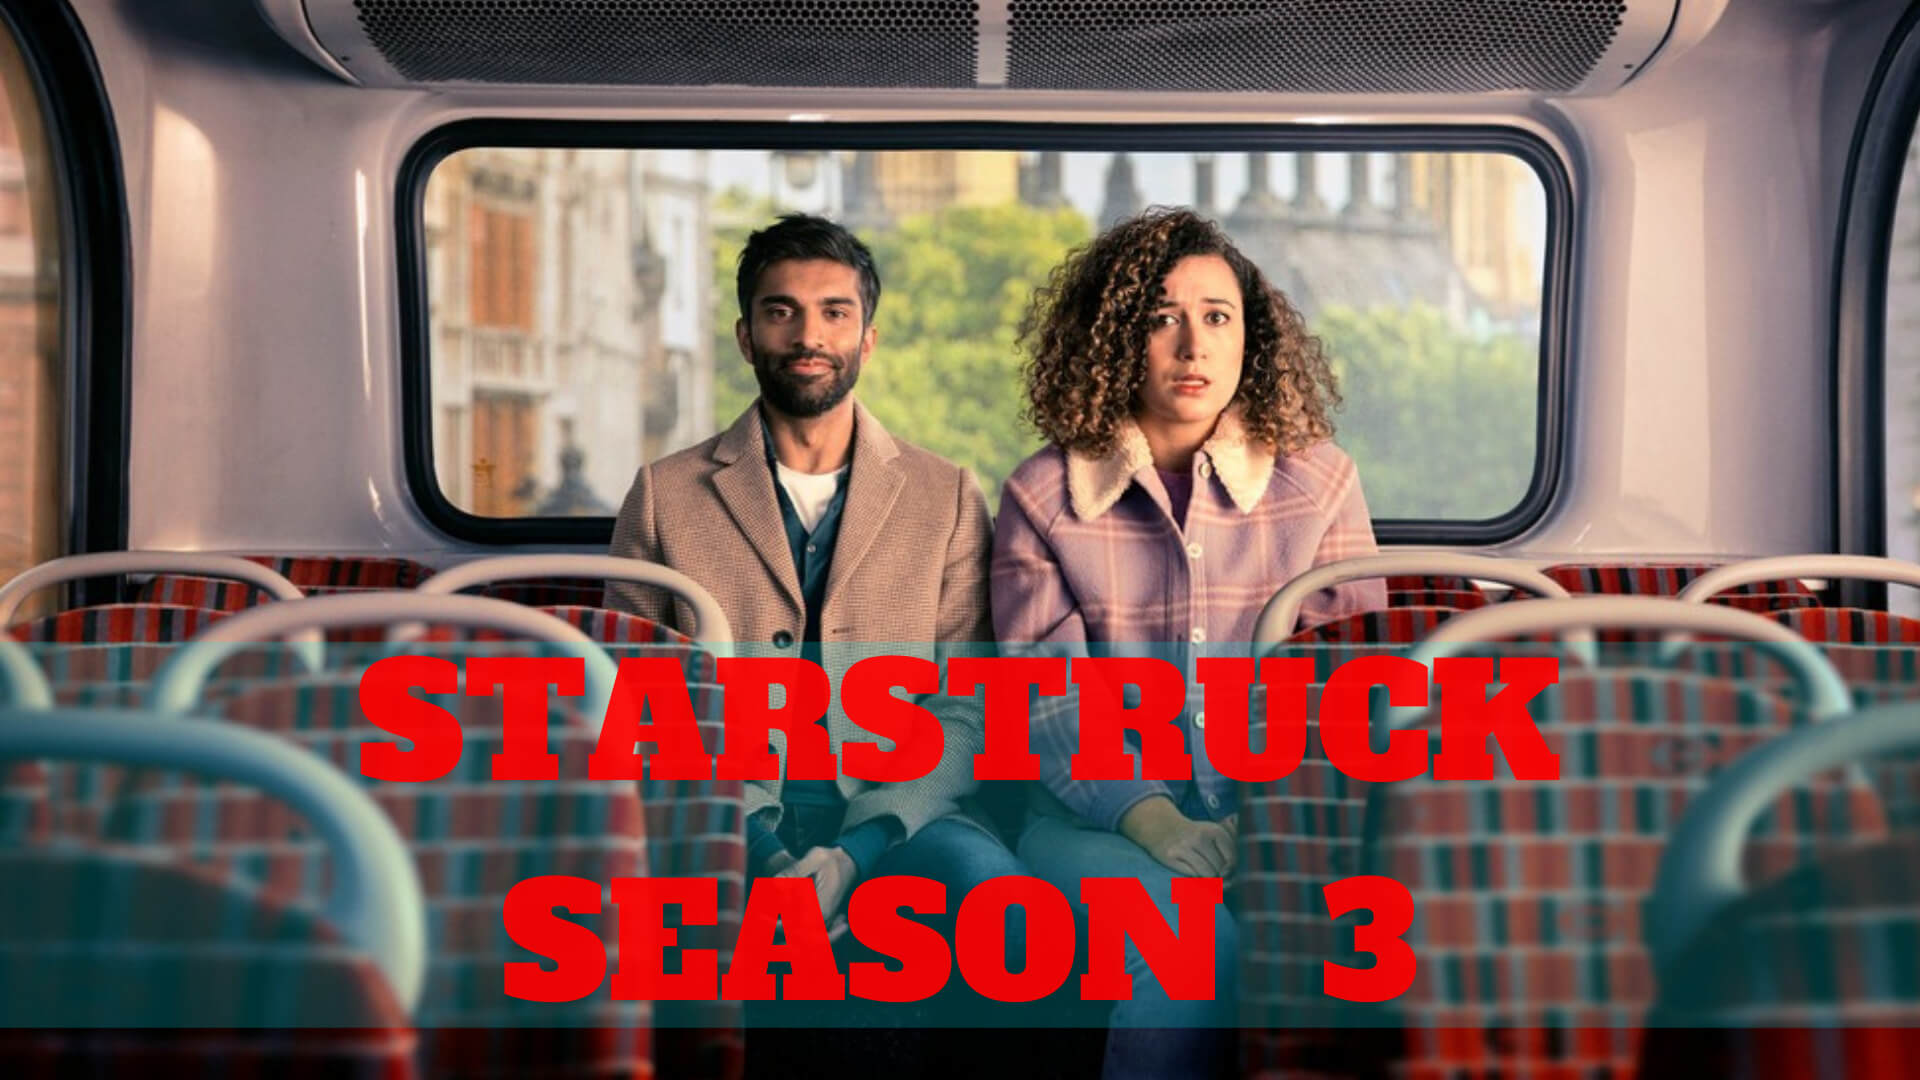 When Is Starstruck season 3 Coming Out? (Release Date)